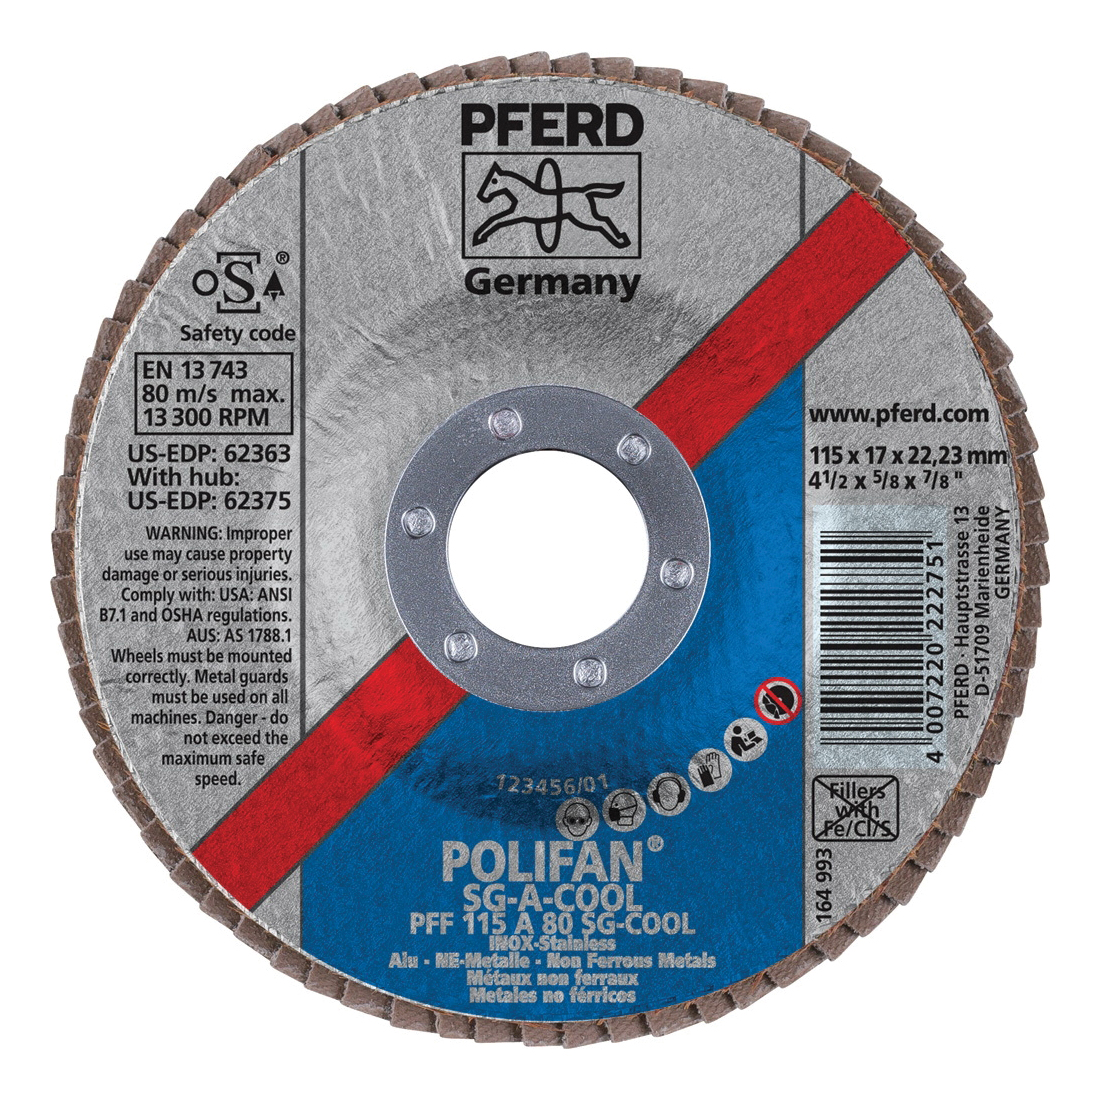 PFERD Polifan® 62363 Performance Line SG A-COOL Unthreaded Coated Abrasive Flap Disc, 4-1/2 in Dia, 7/8 in Center Hole, 80 Grit, Aluminum Oxide Abrasive, Type 27 Flat Disc